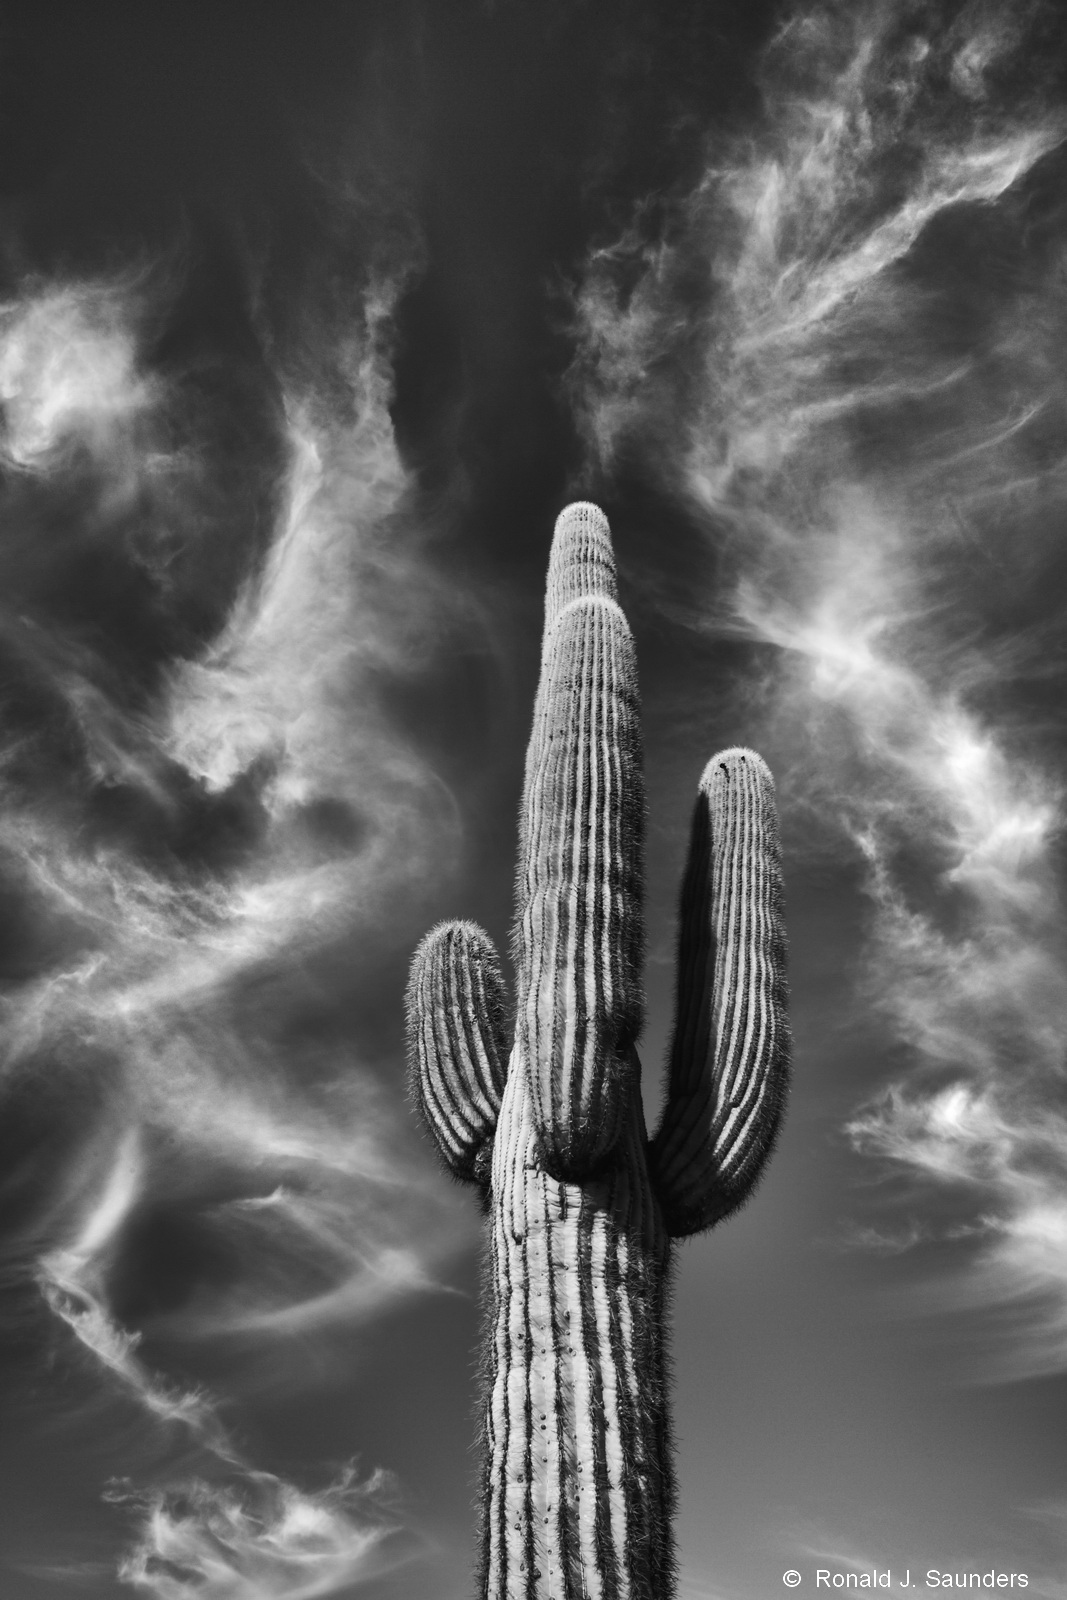 This photograph was taken in a fairly remote section of Arizona not too far from a place called Nothing.&nbsp; My quest in Arizona...